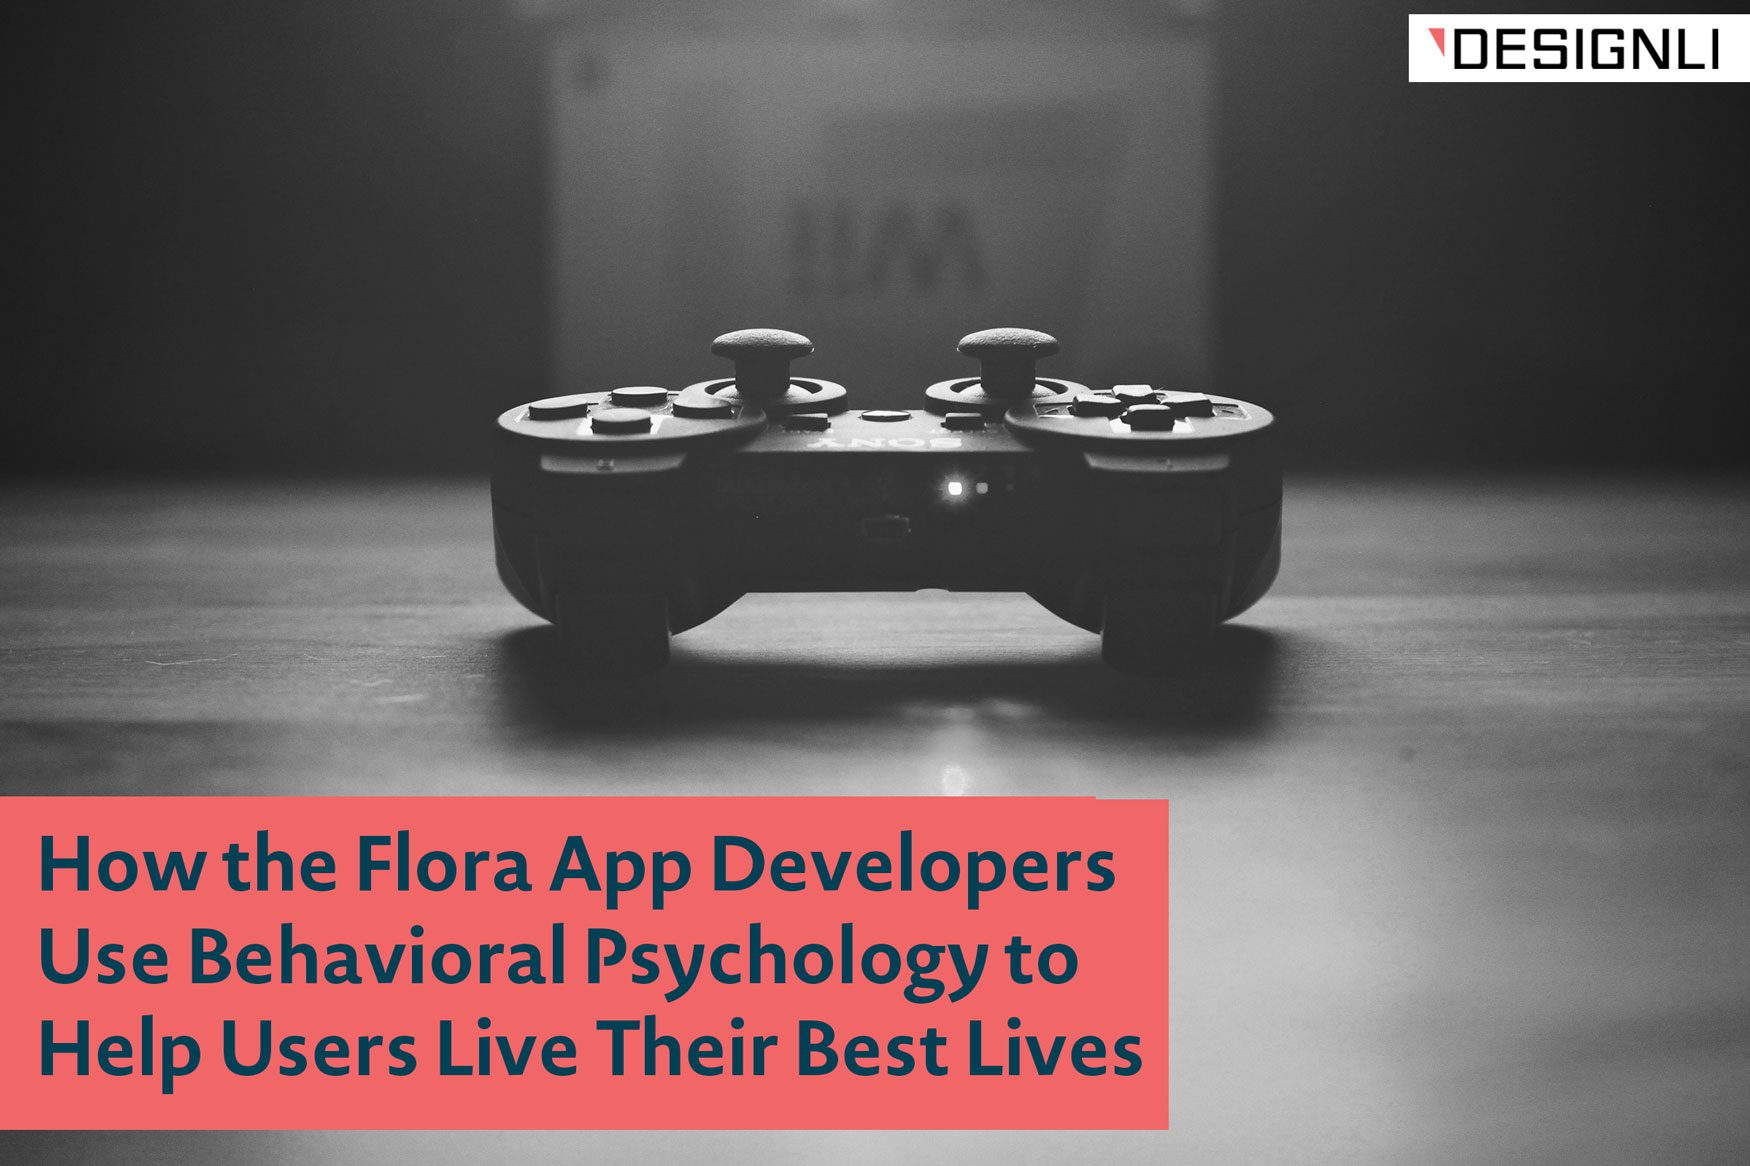 How the Flora App Developers Use Behavioral Psychology to Help Users Live Their Best Lives